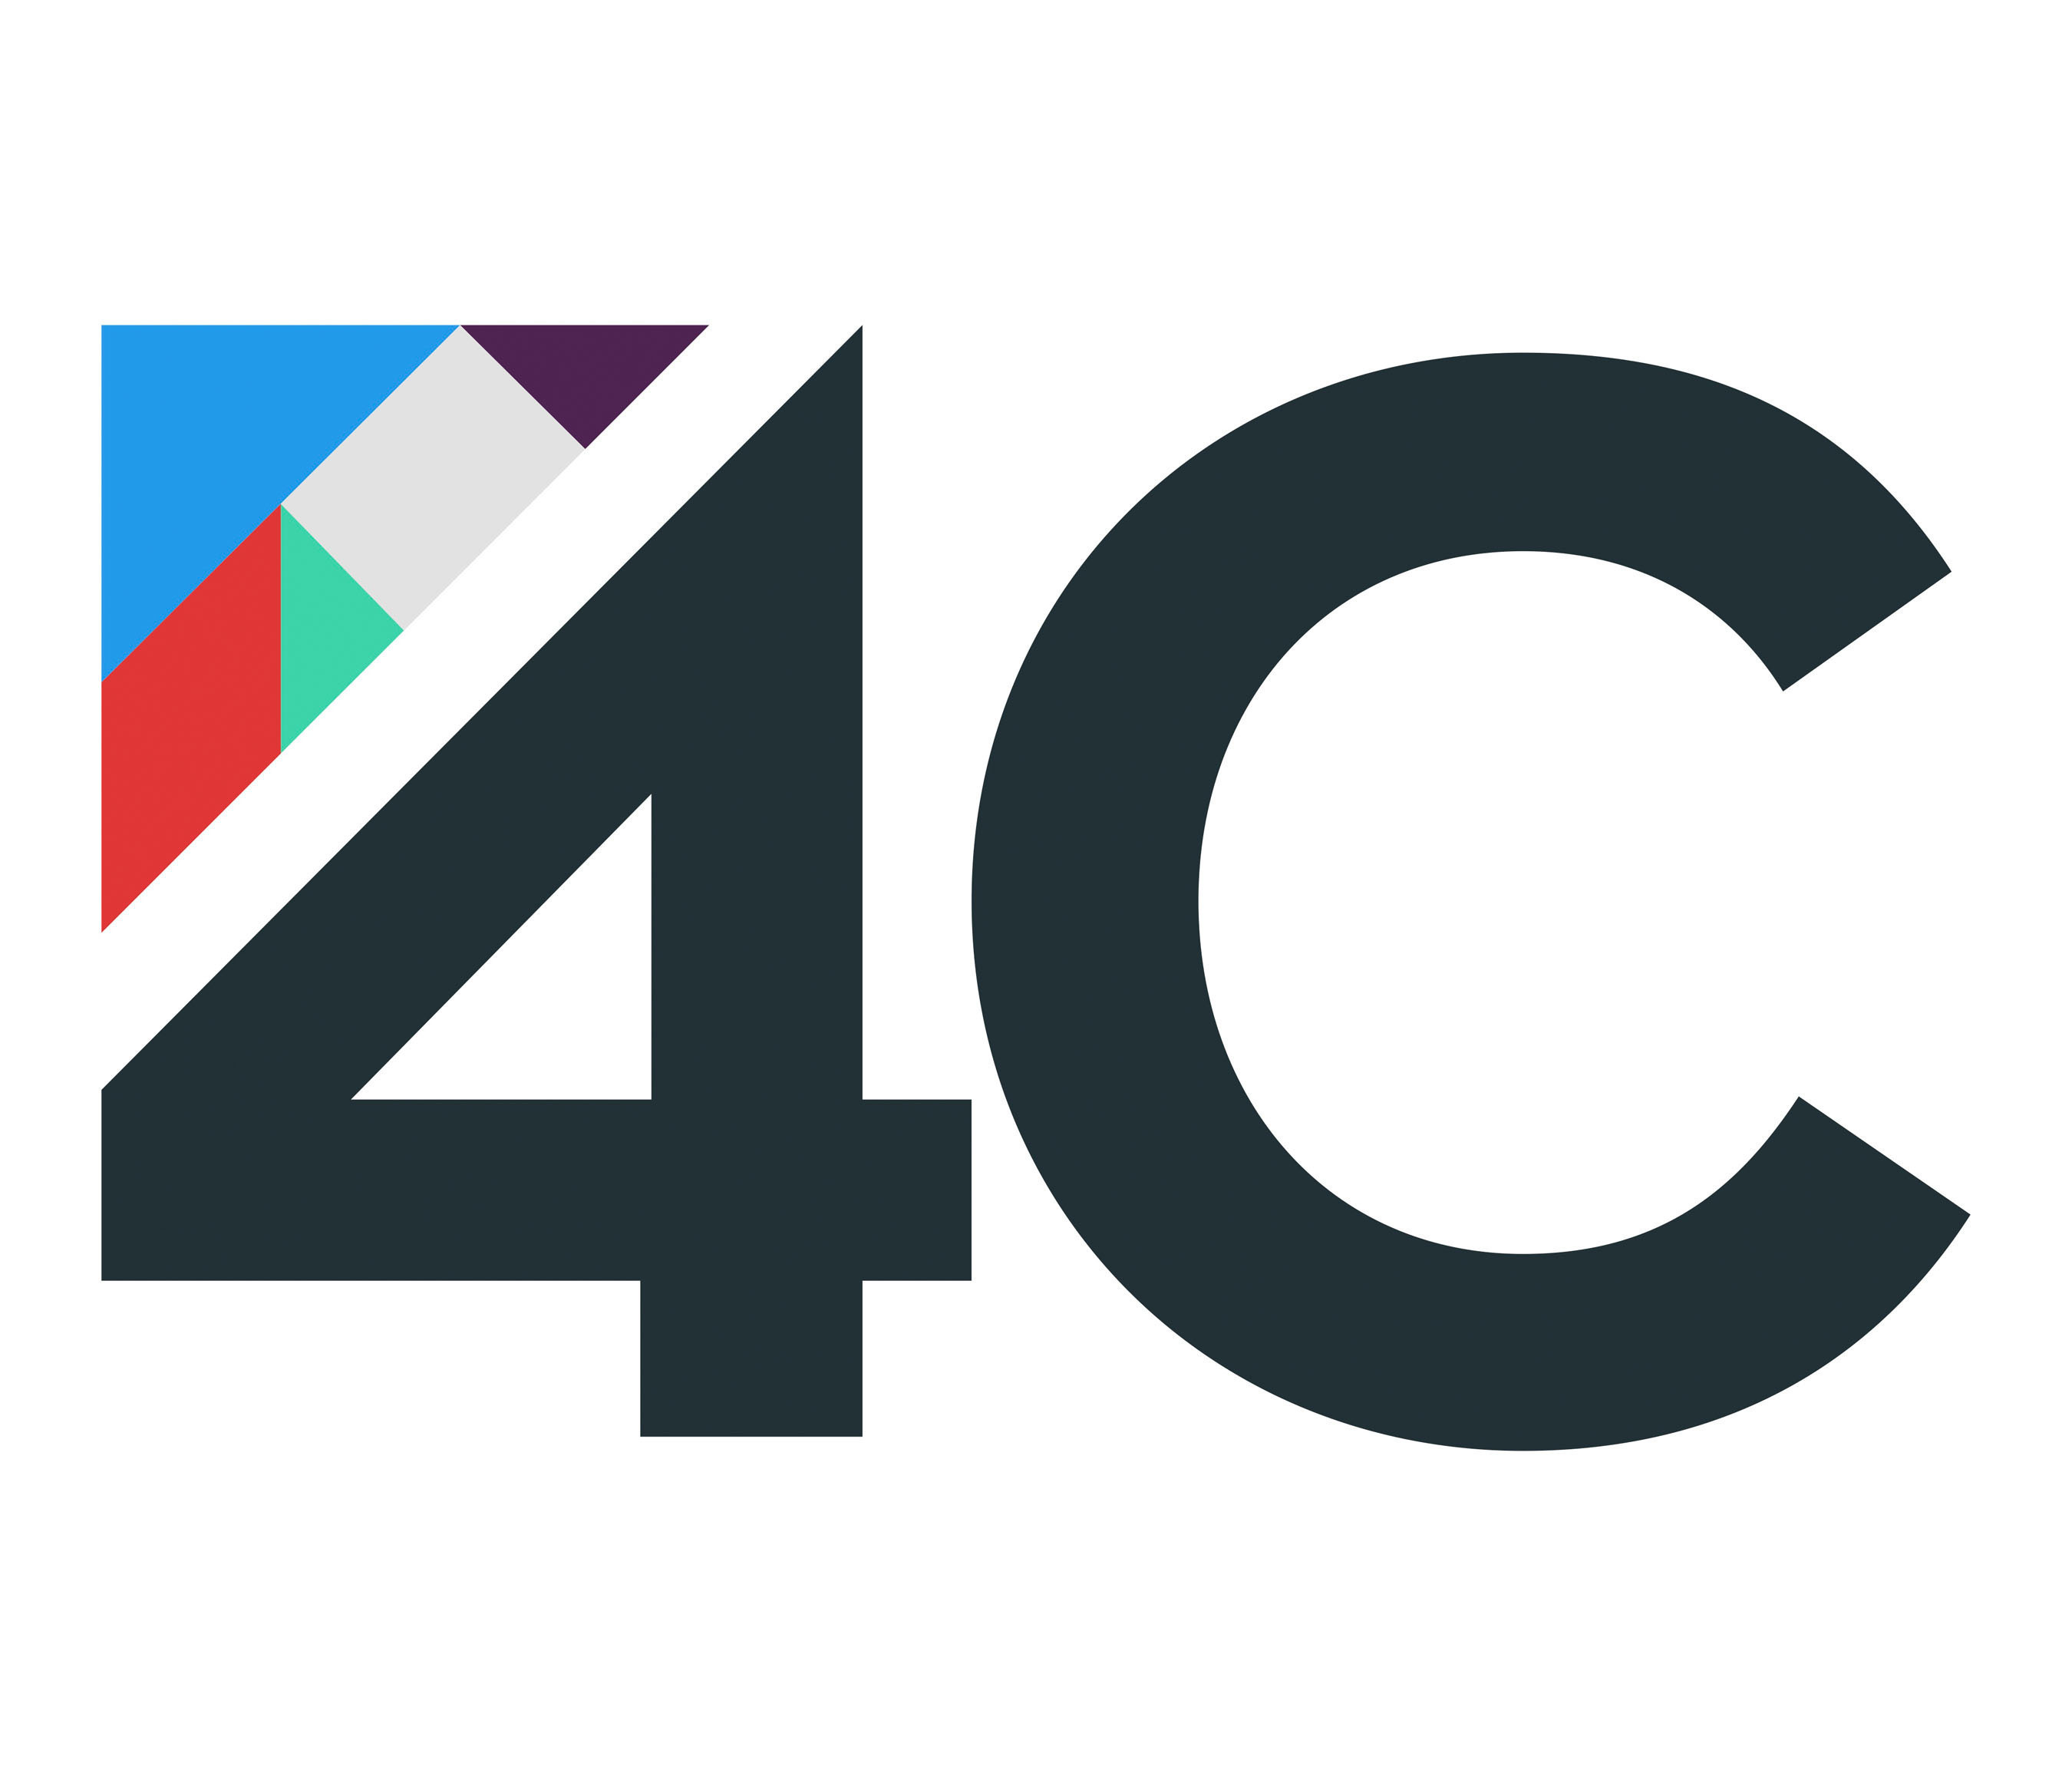 4C is a big data analytics and social intelligence company offering advertising and measurement platforms.